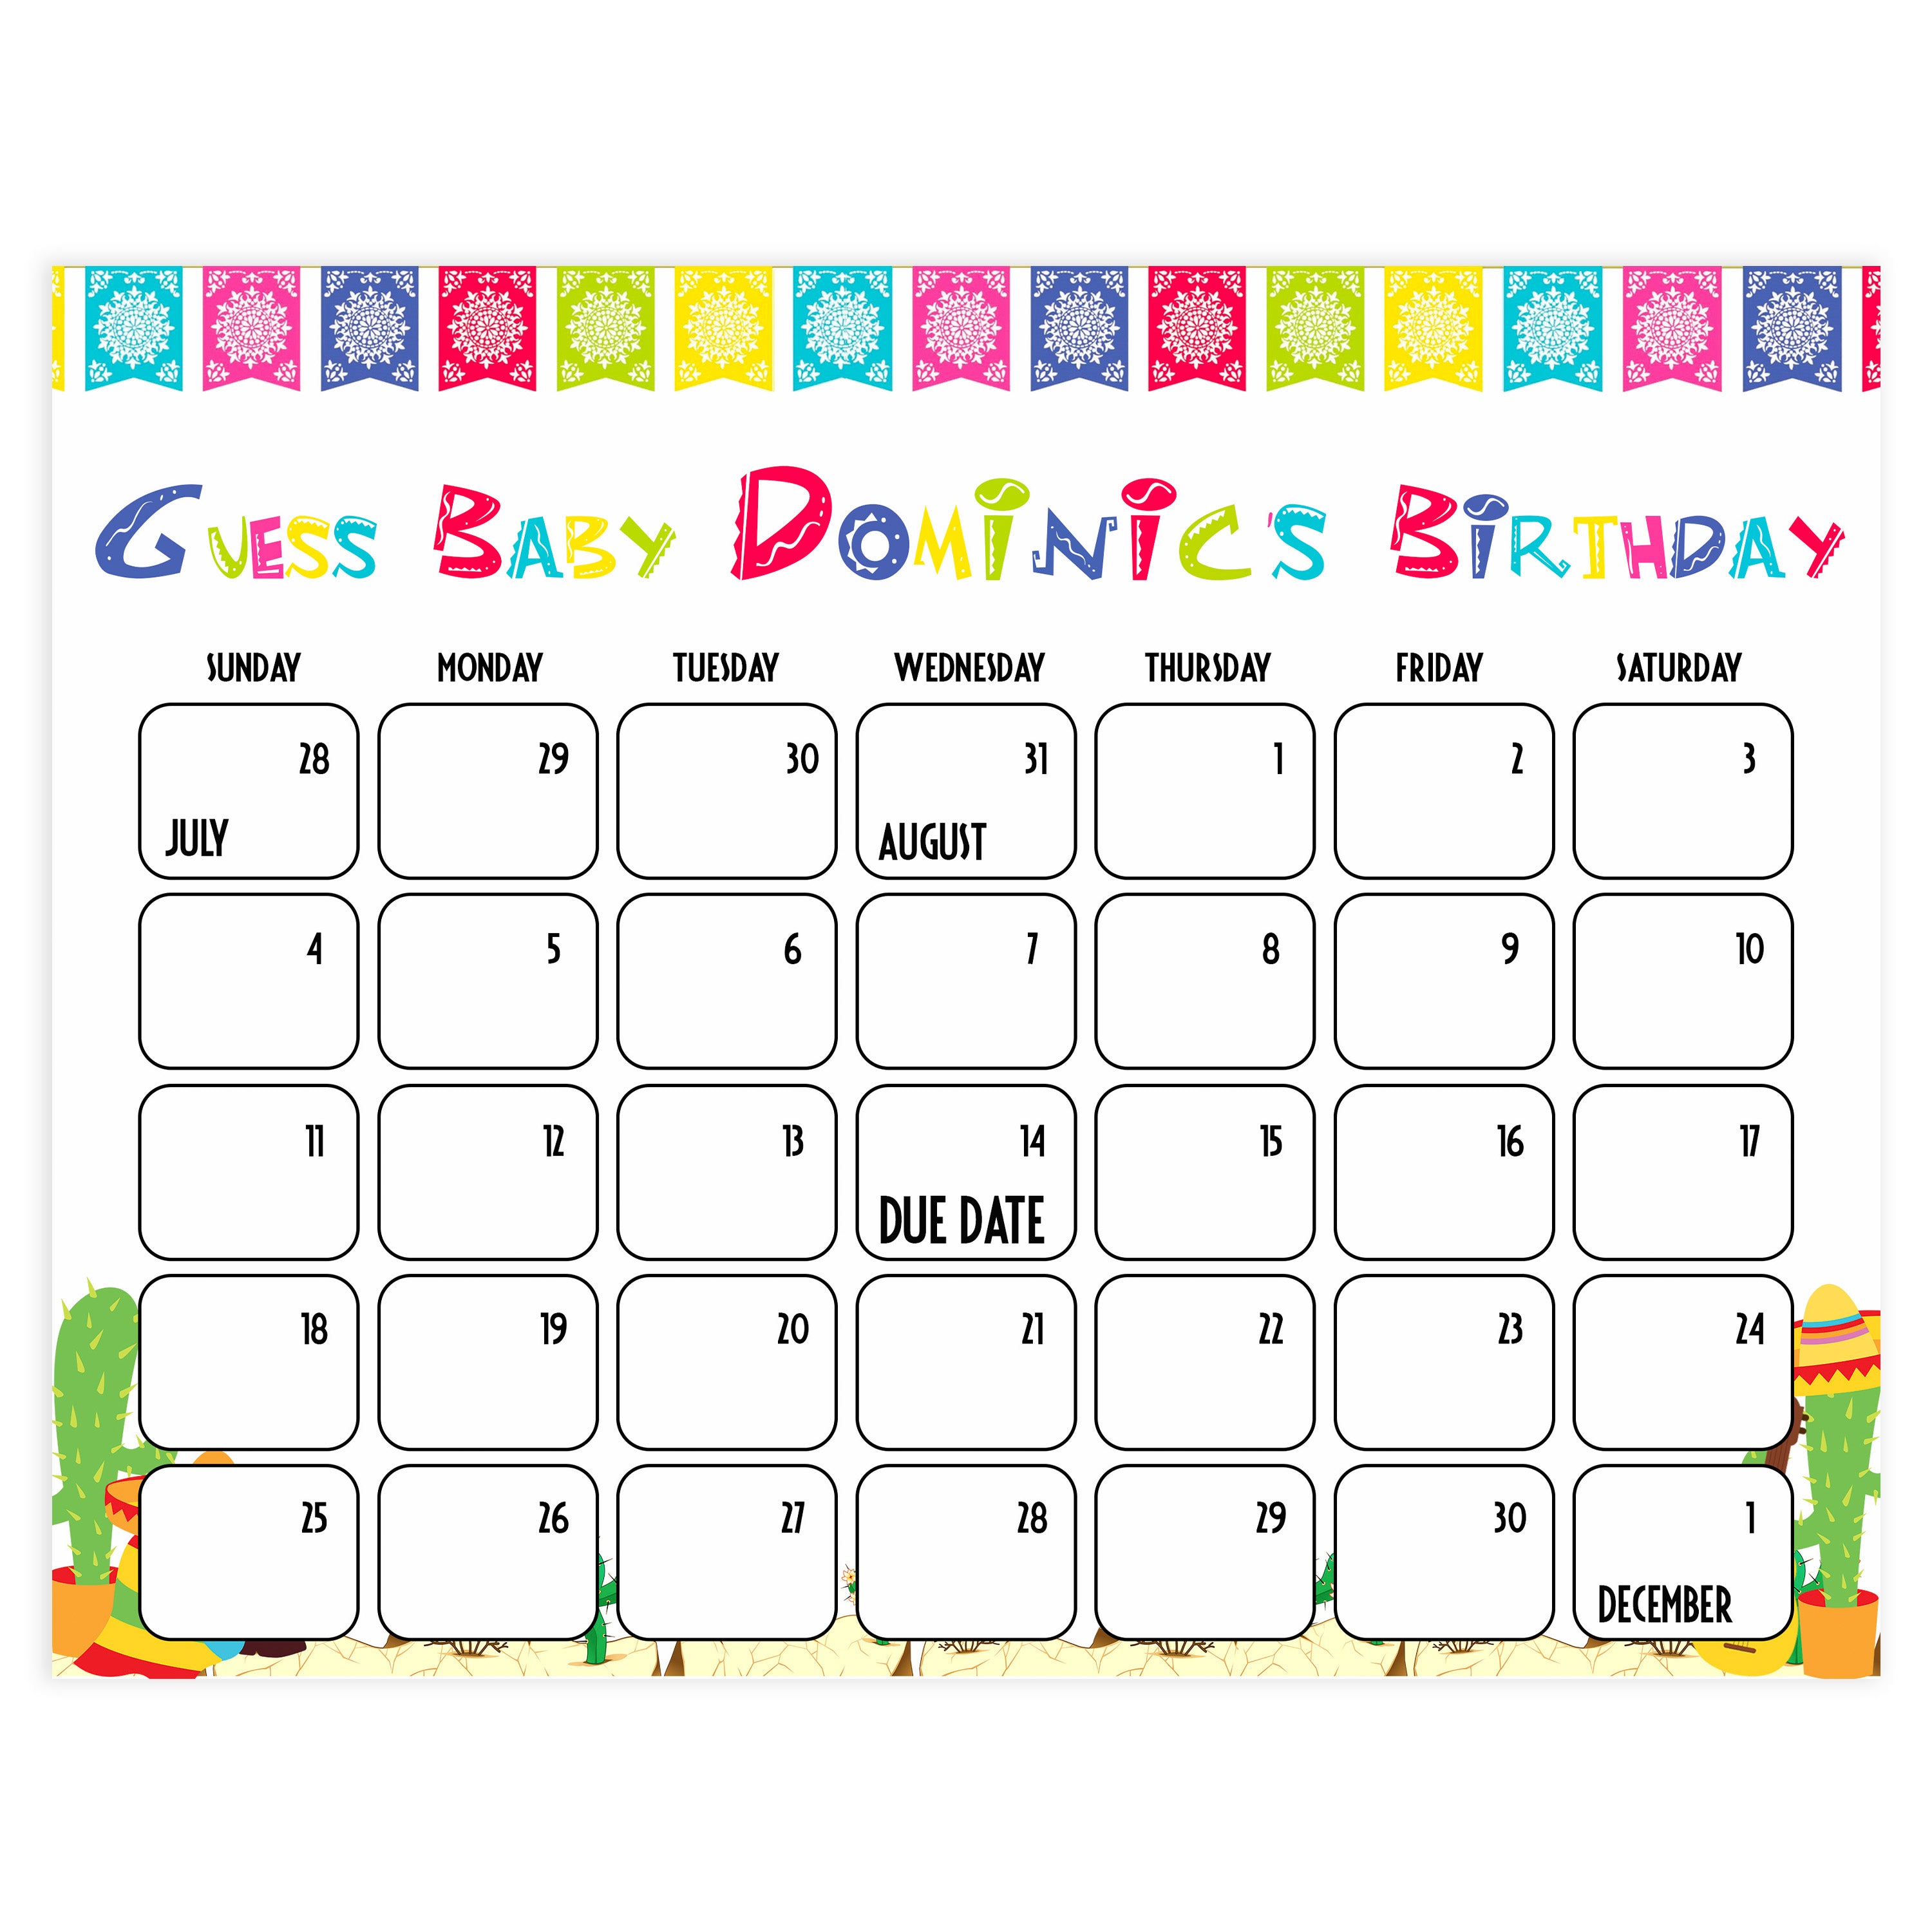 The Baby Birthday Mexican Fiesta Printable Baby Games – OhHappyPrintables